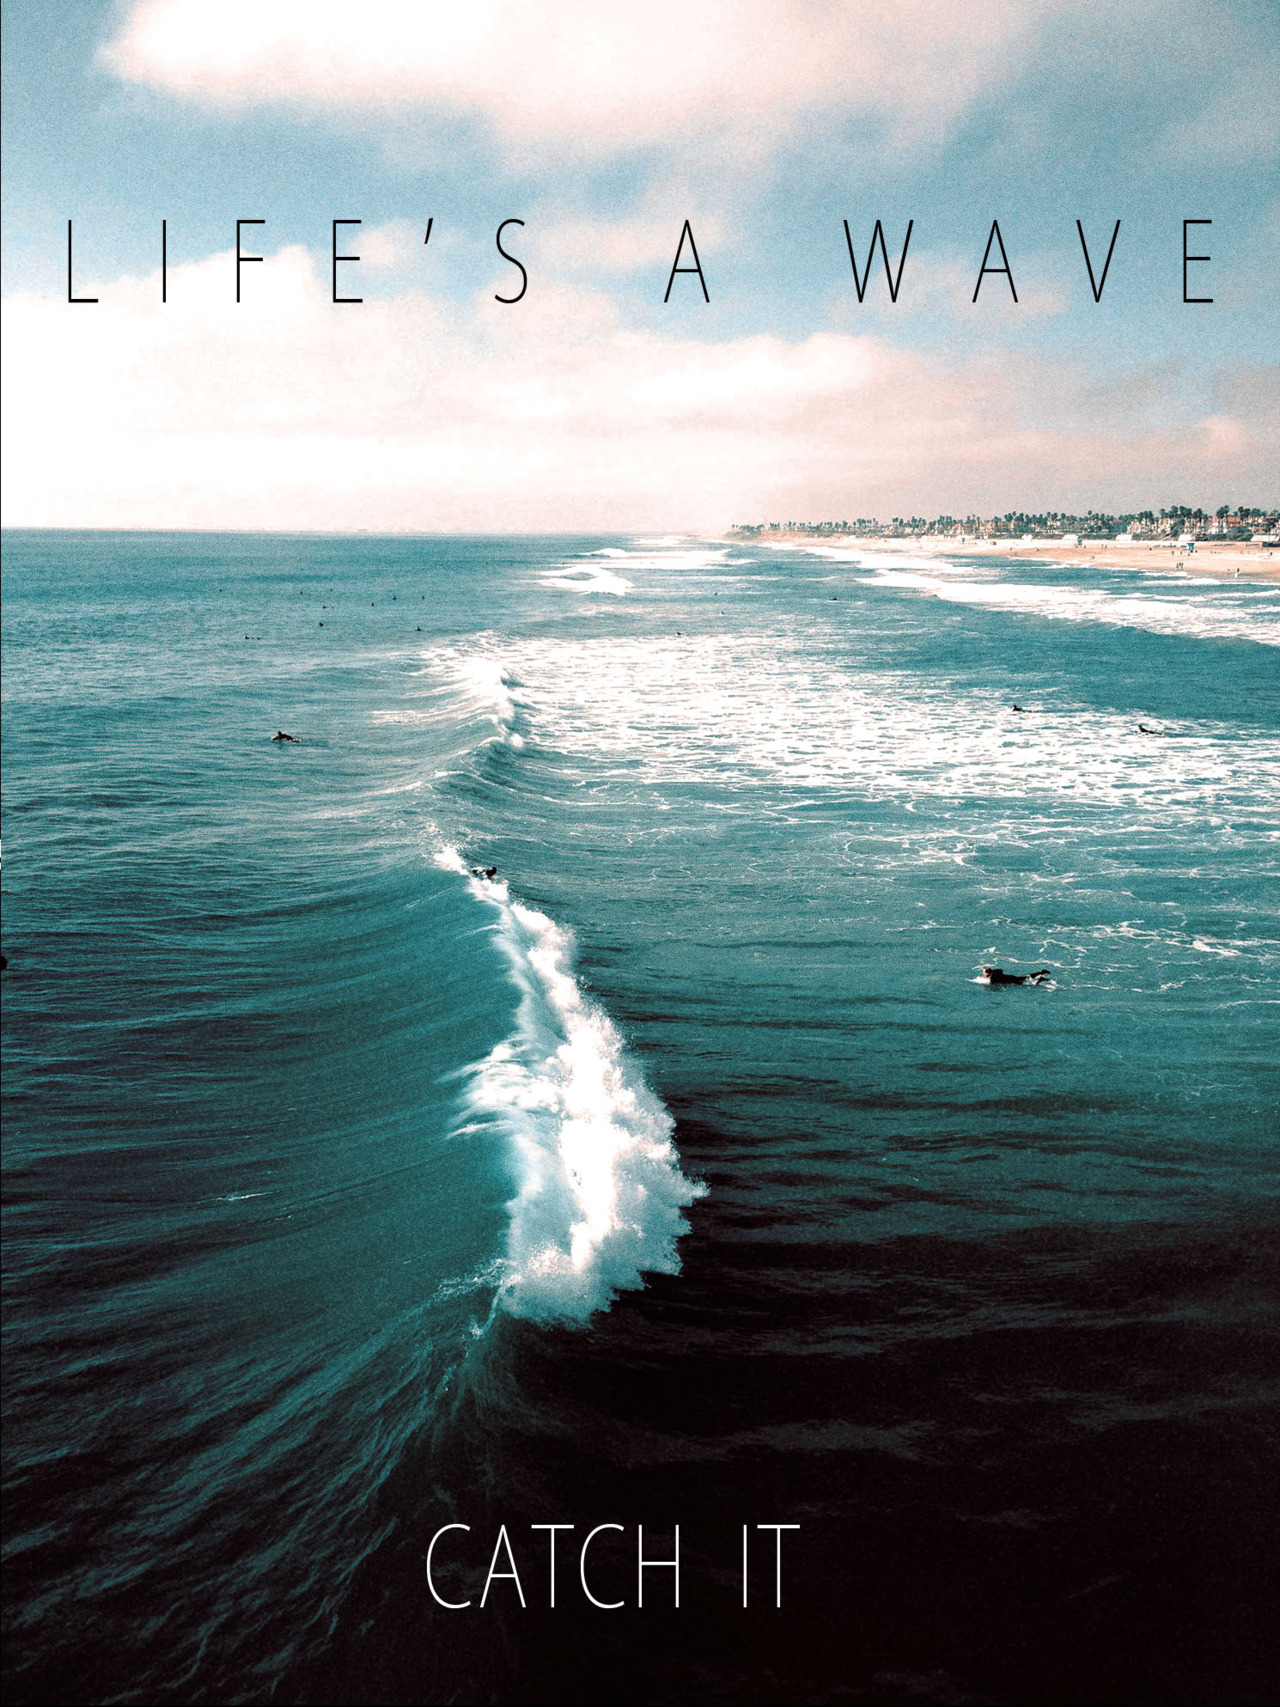 quotes for sea waves